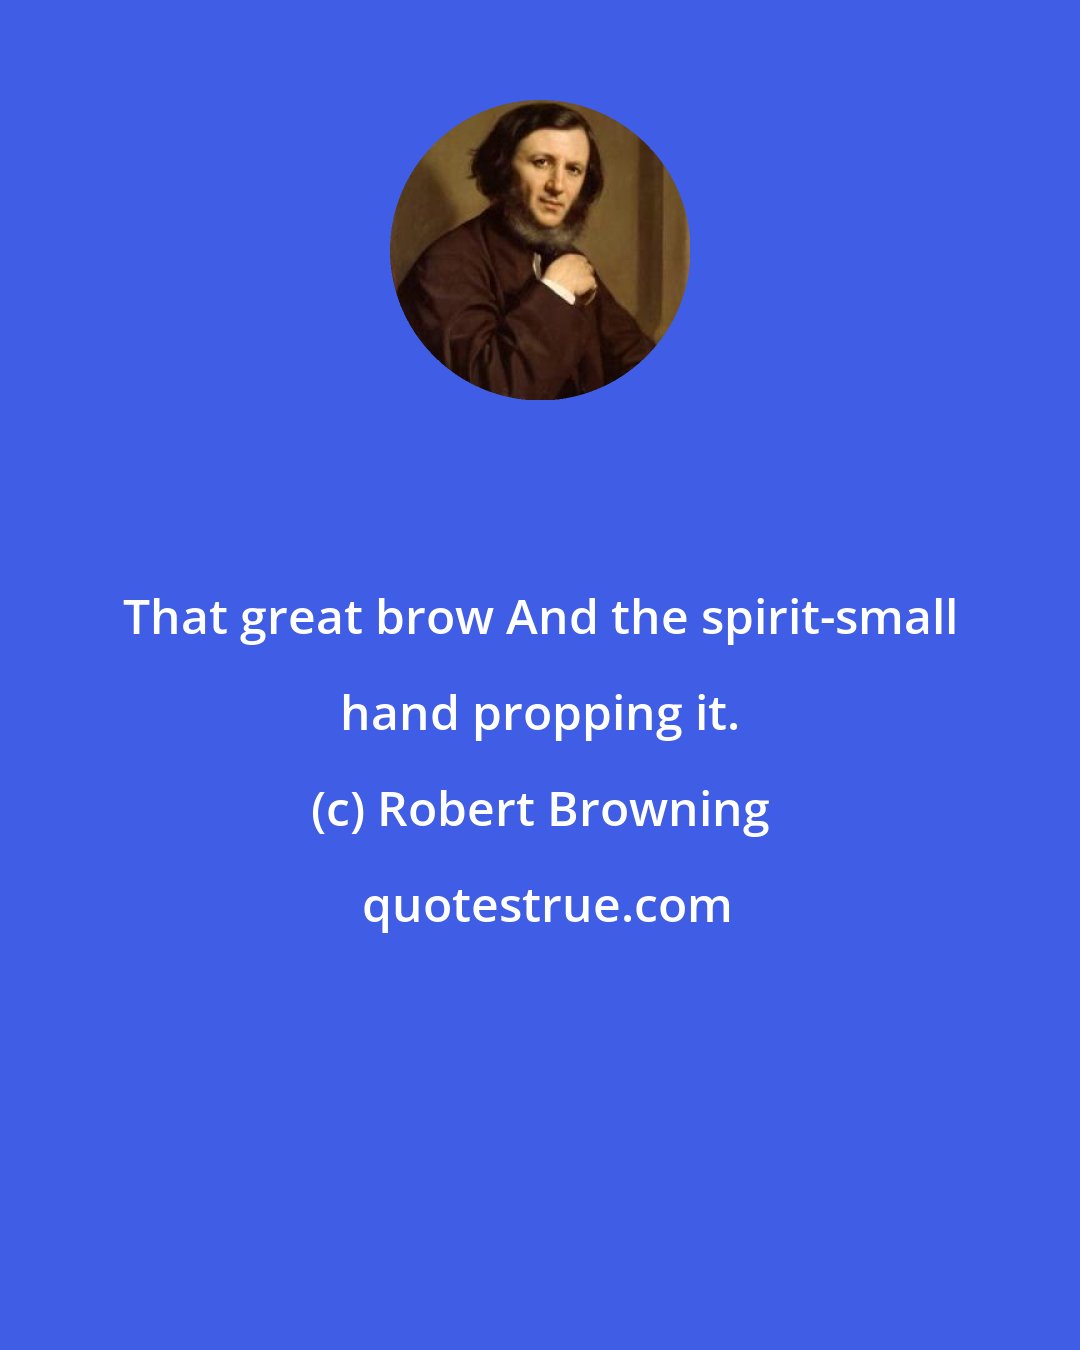 Robert Browning: That great brow And the spirit-small hand propping it.